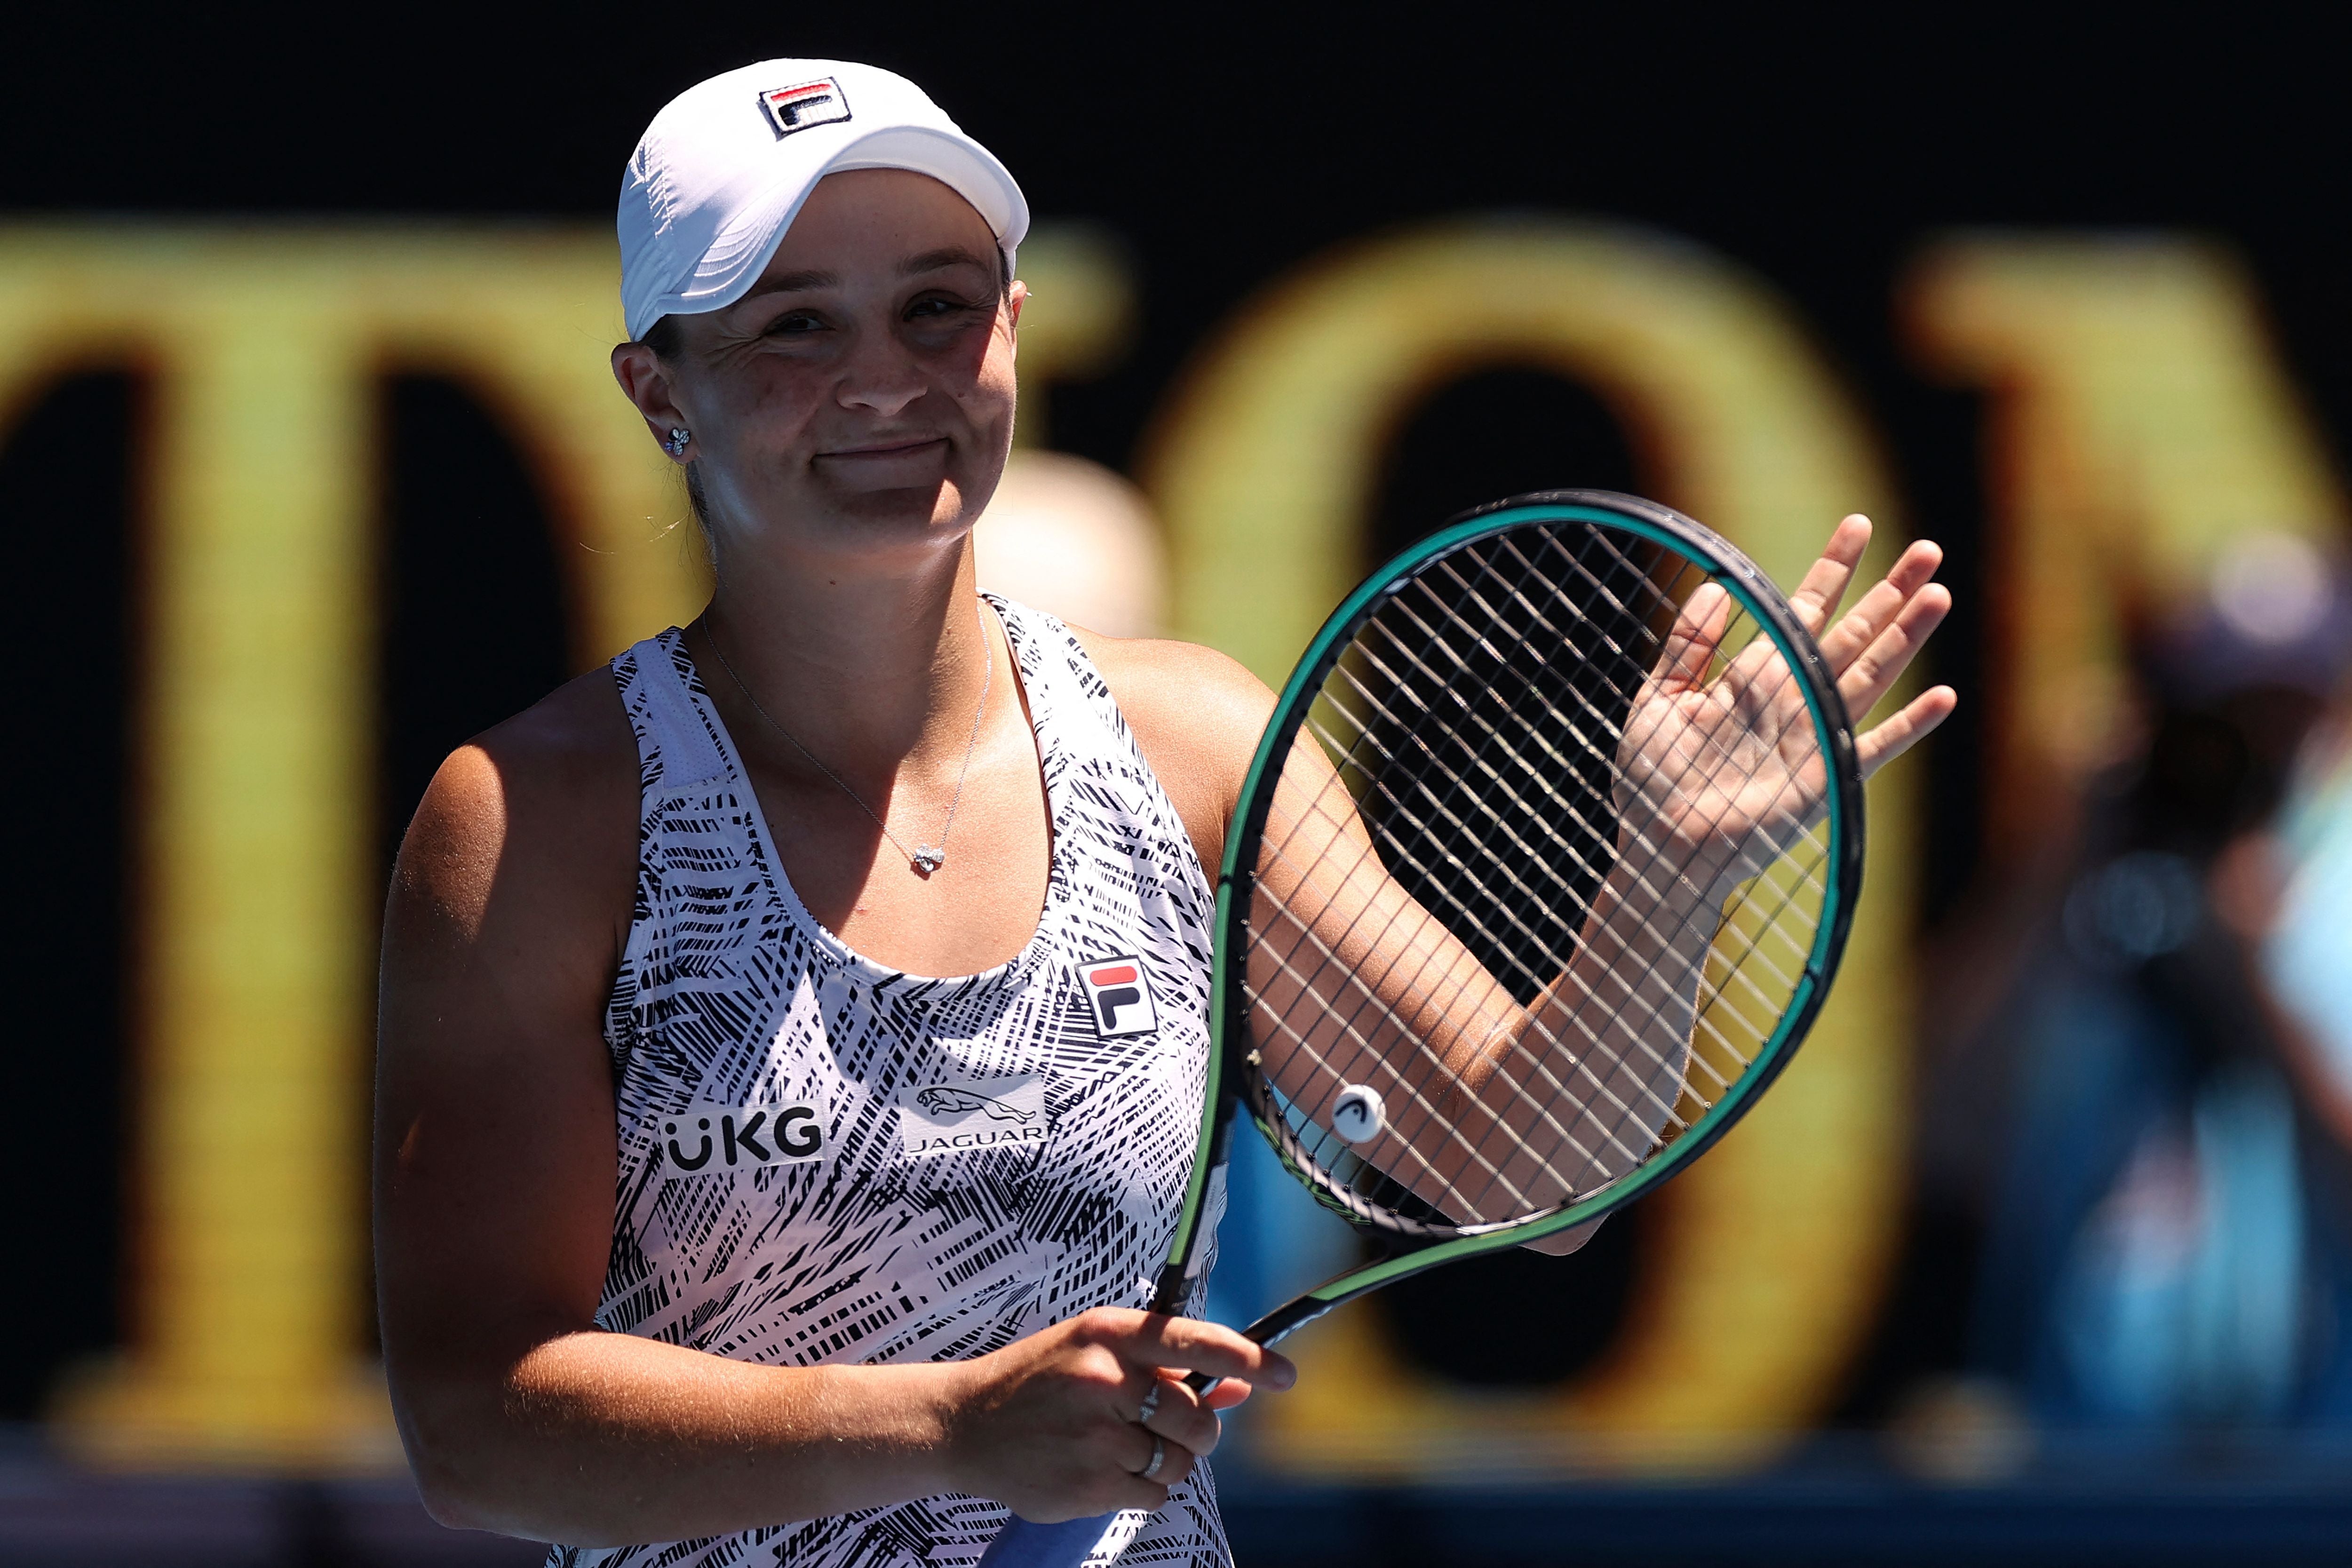 Ashleigh Barty could face Naomi Osaka in the fourth round